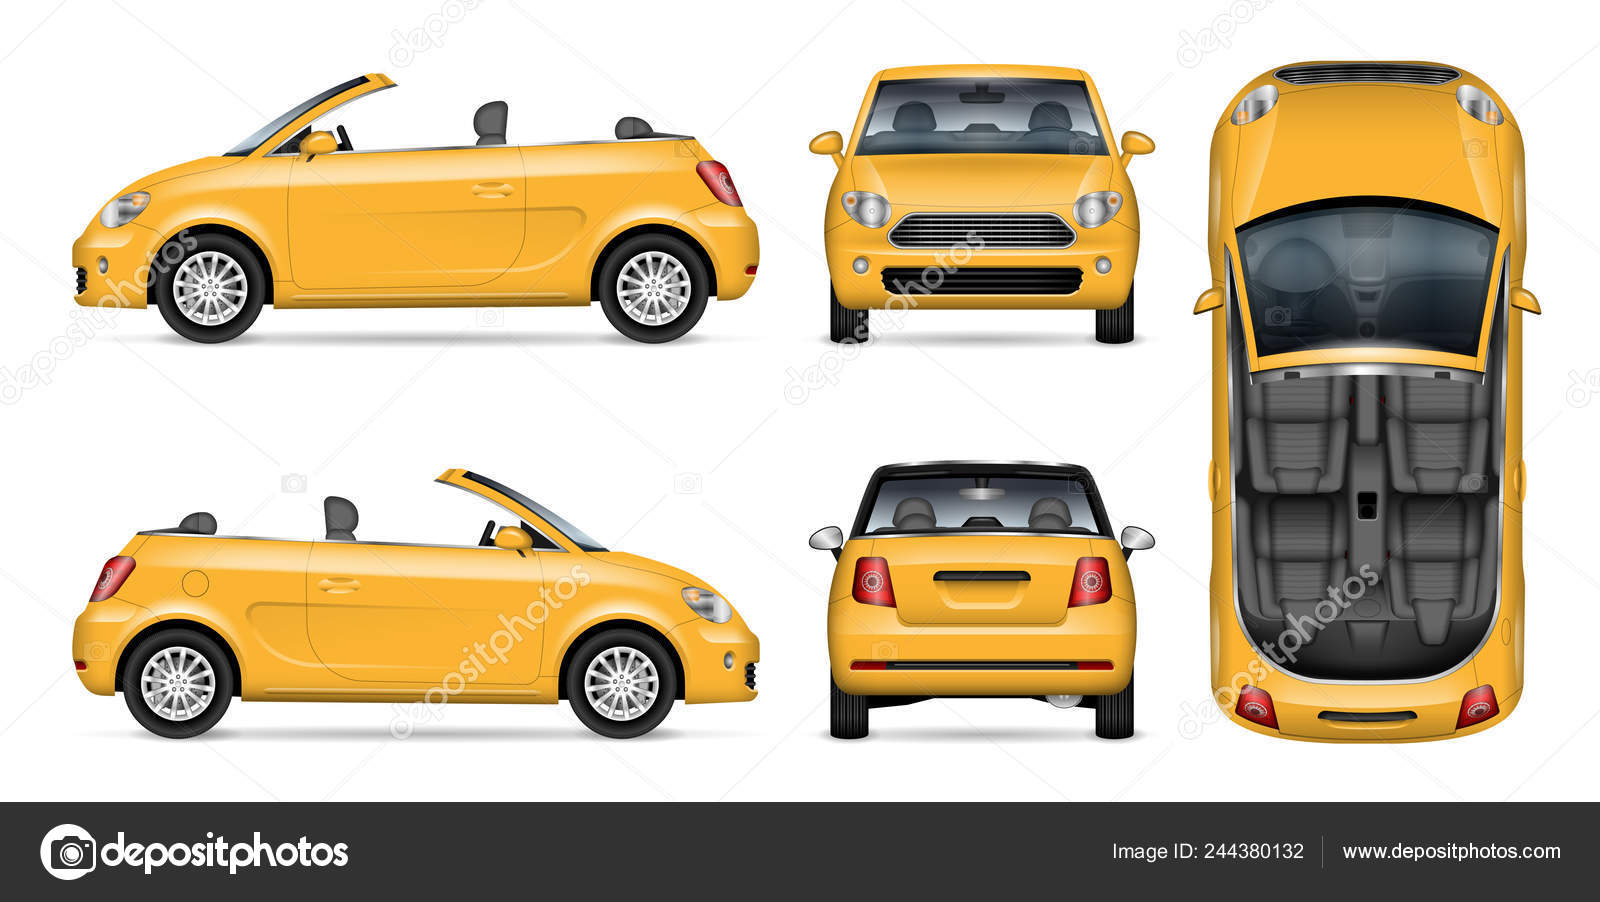 Download Yellow Car Vector Mockup Vehicle Branding Advertising Corporate Identity Isolated Stock Vector C Imgvector 244380132 PSD Mockup Templates